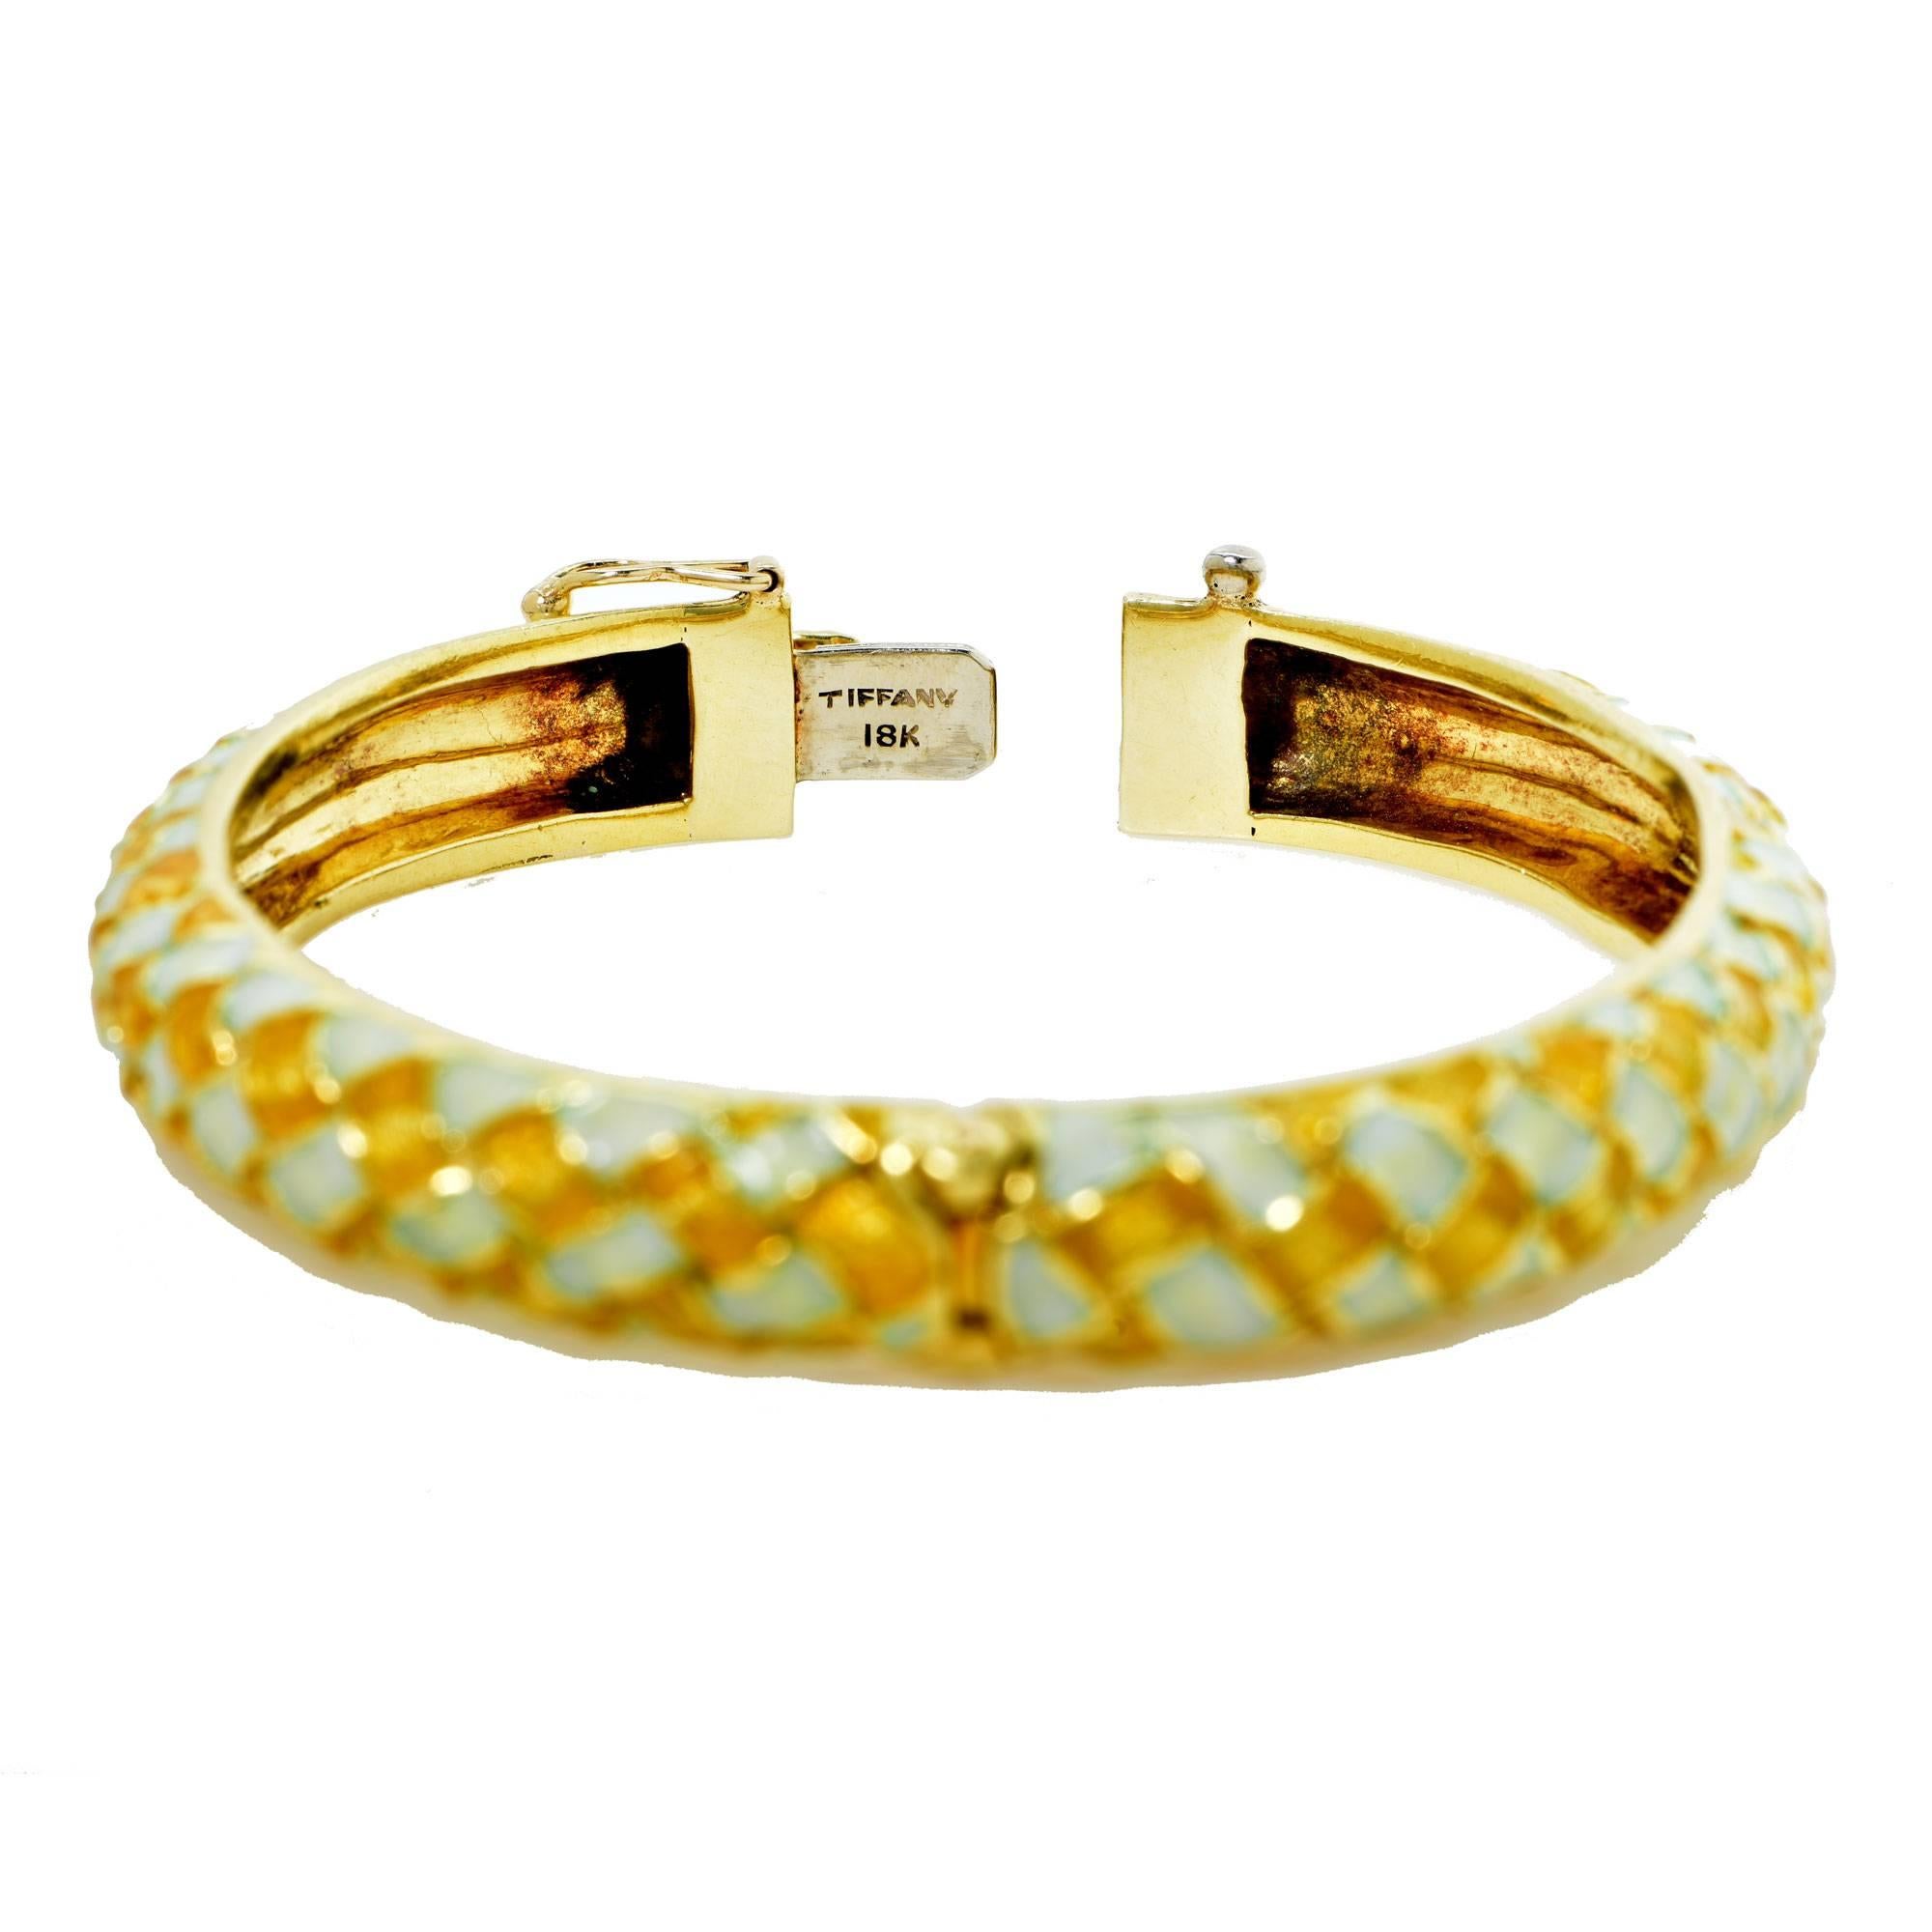 18k yellow gold Tiffany & Co Enamel Bangle.

Metal weight: 51.00 grams

This bangle bracelet is accompanied by a retail appraisal performed by a GIA Graduate Gemologist.